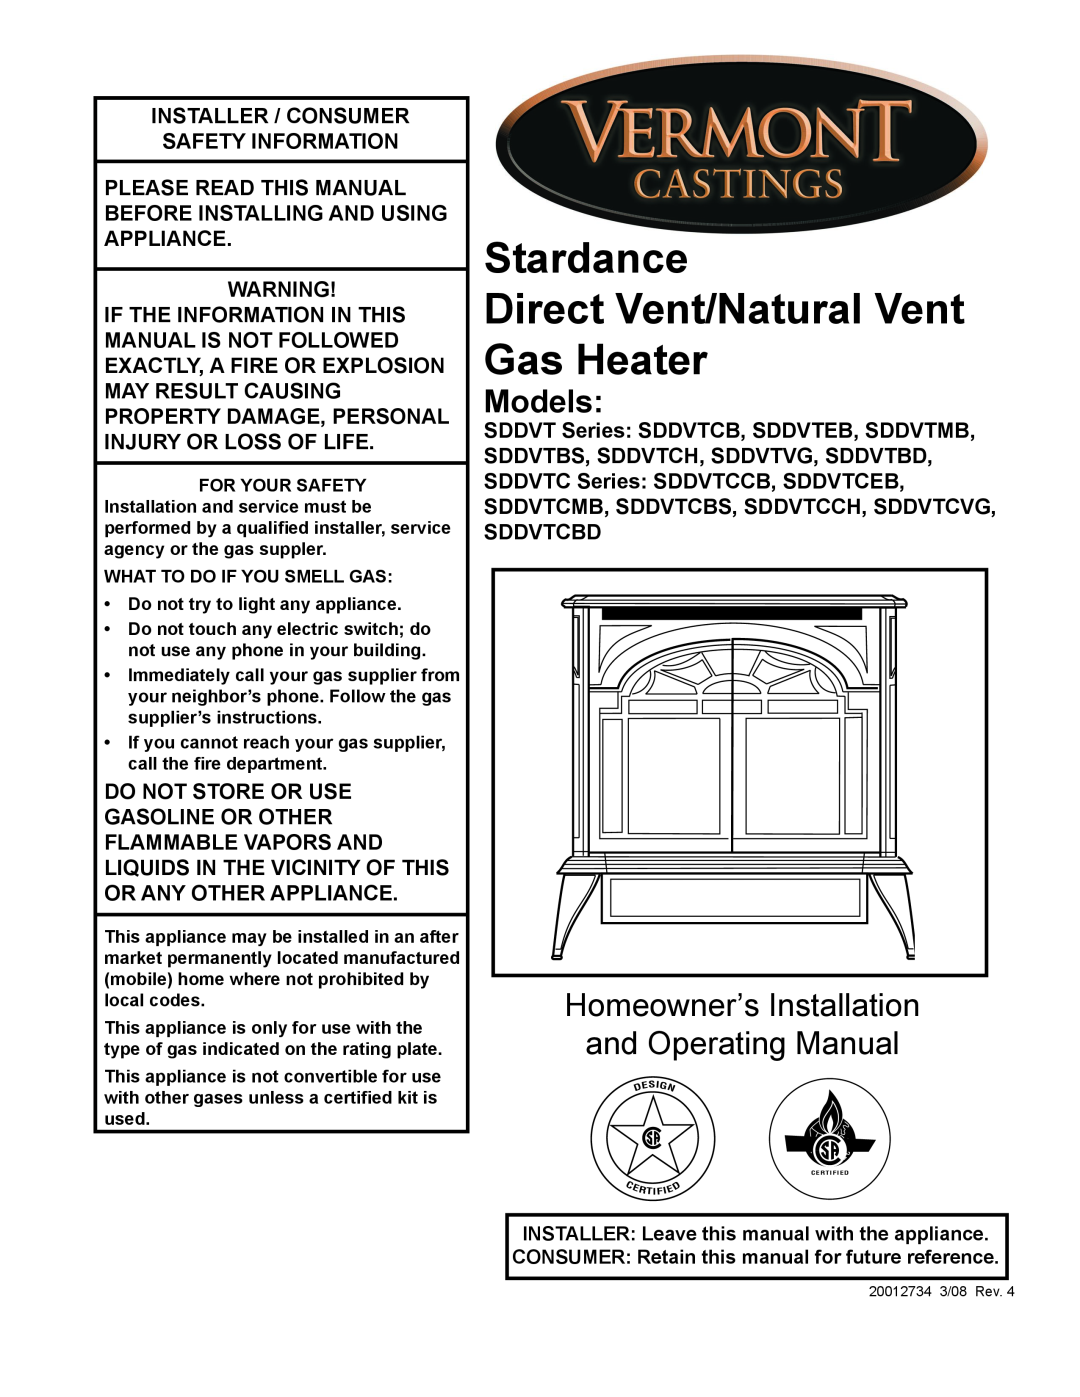 Vermont Casting SDDVT manual Models, Installer / Consumer Safety Information, Do Not Store Or Use 